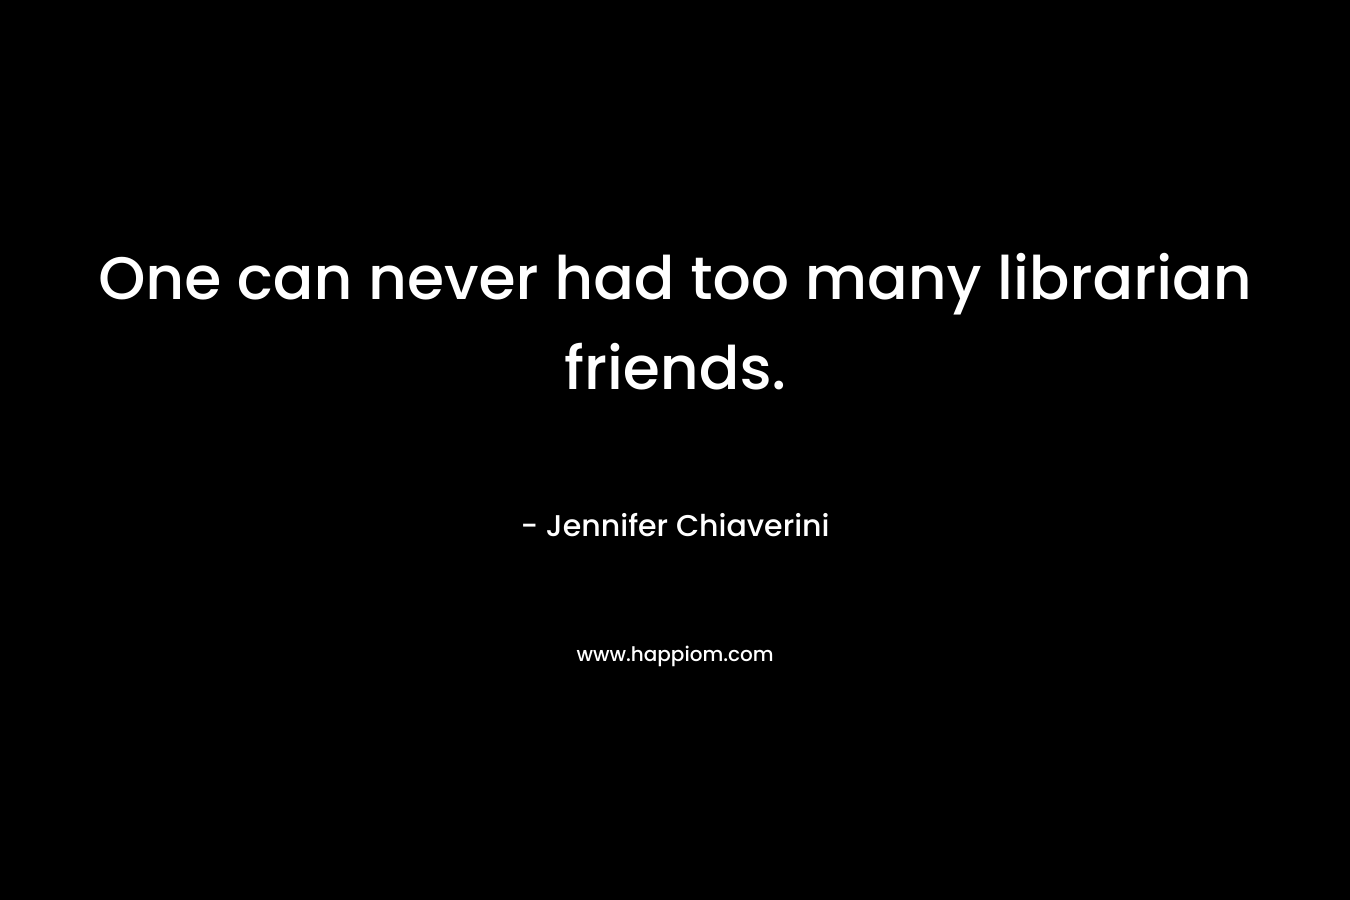 One can never had too many librarian friends.